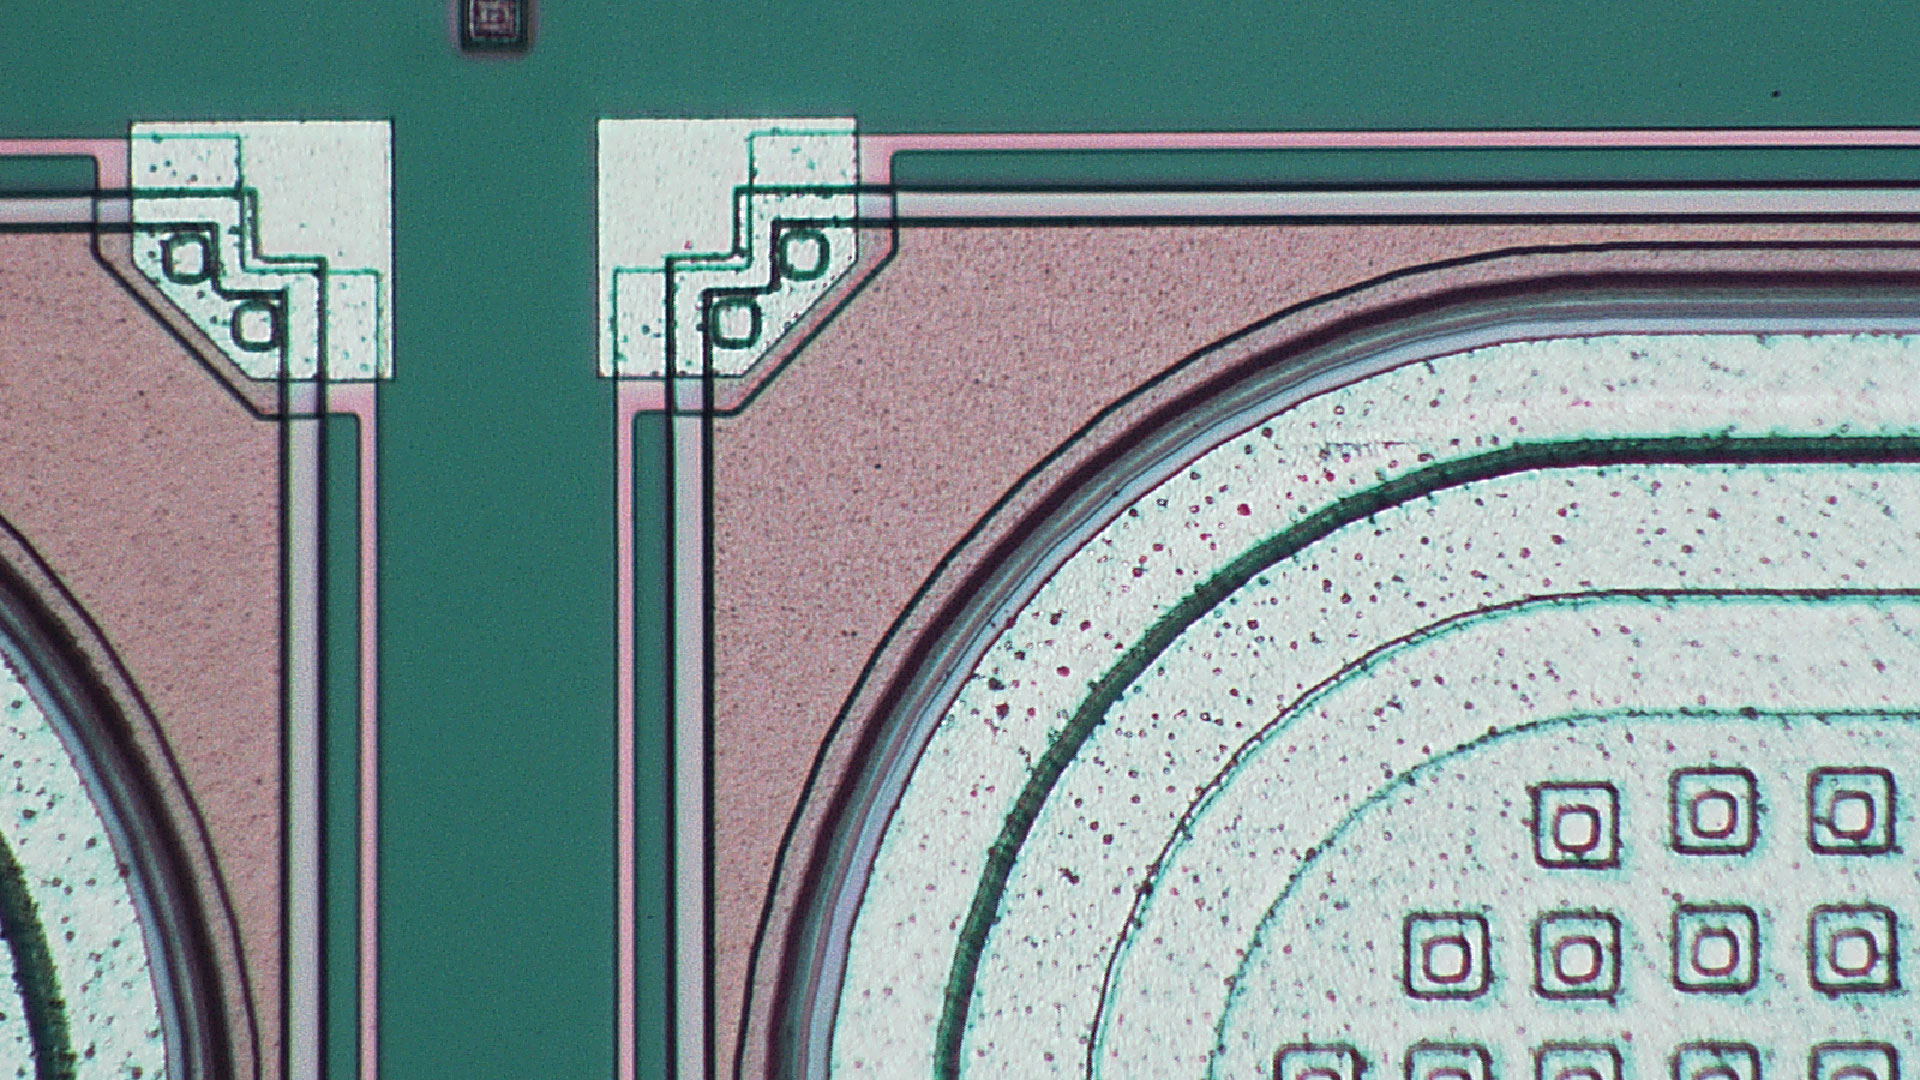 [Translate to french:] To better see fine details and defects, a semiconductor material can be inspected using a microscope with various types of lighting. This image was taken with coaxial illumination. 